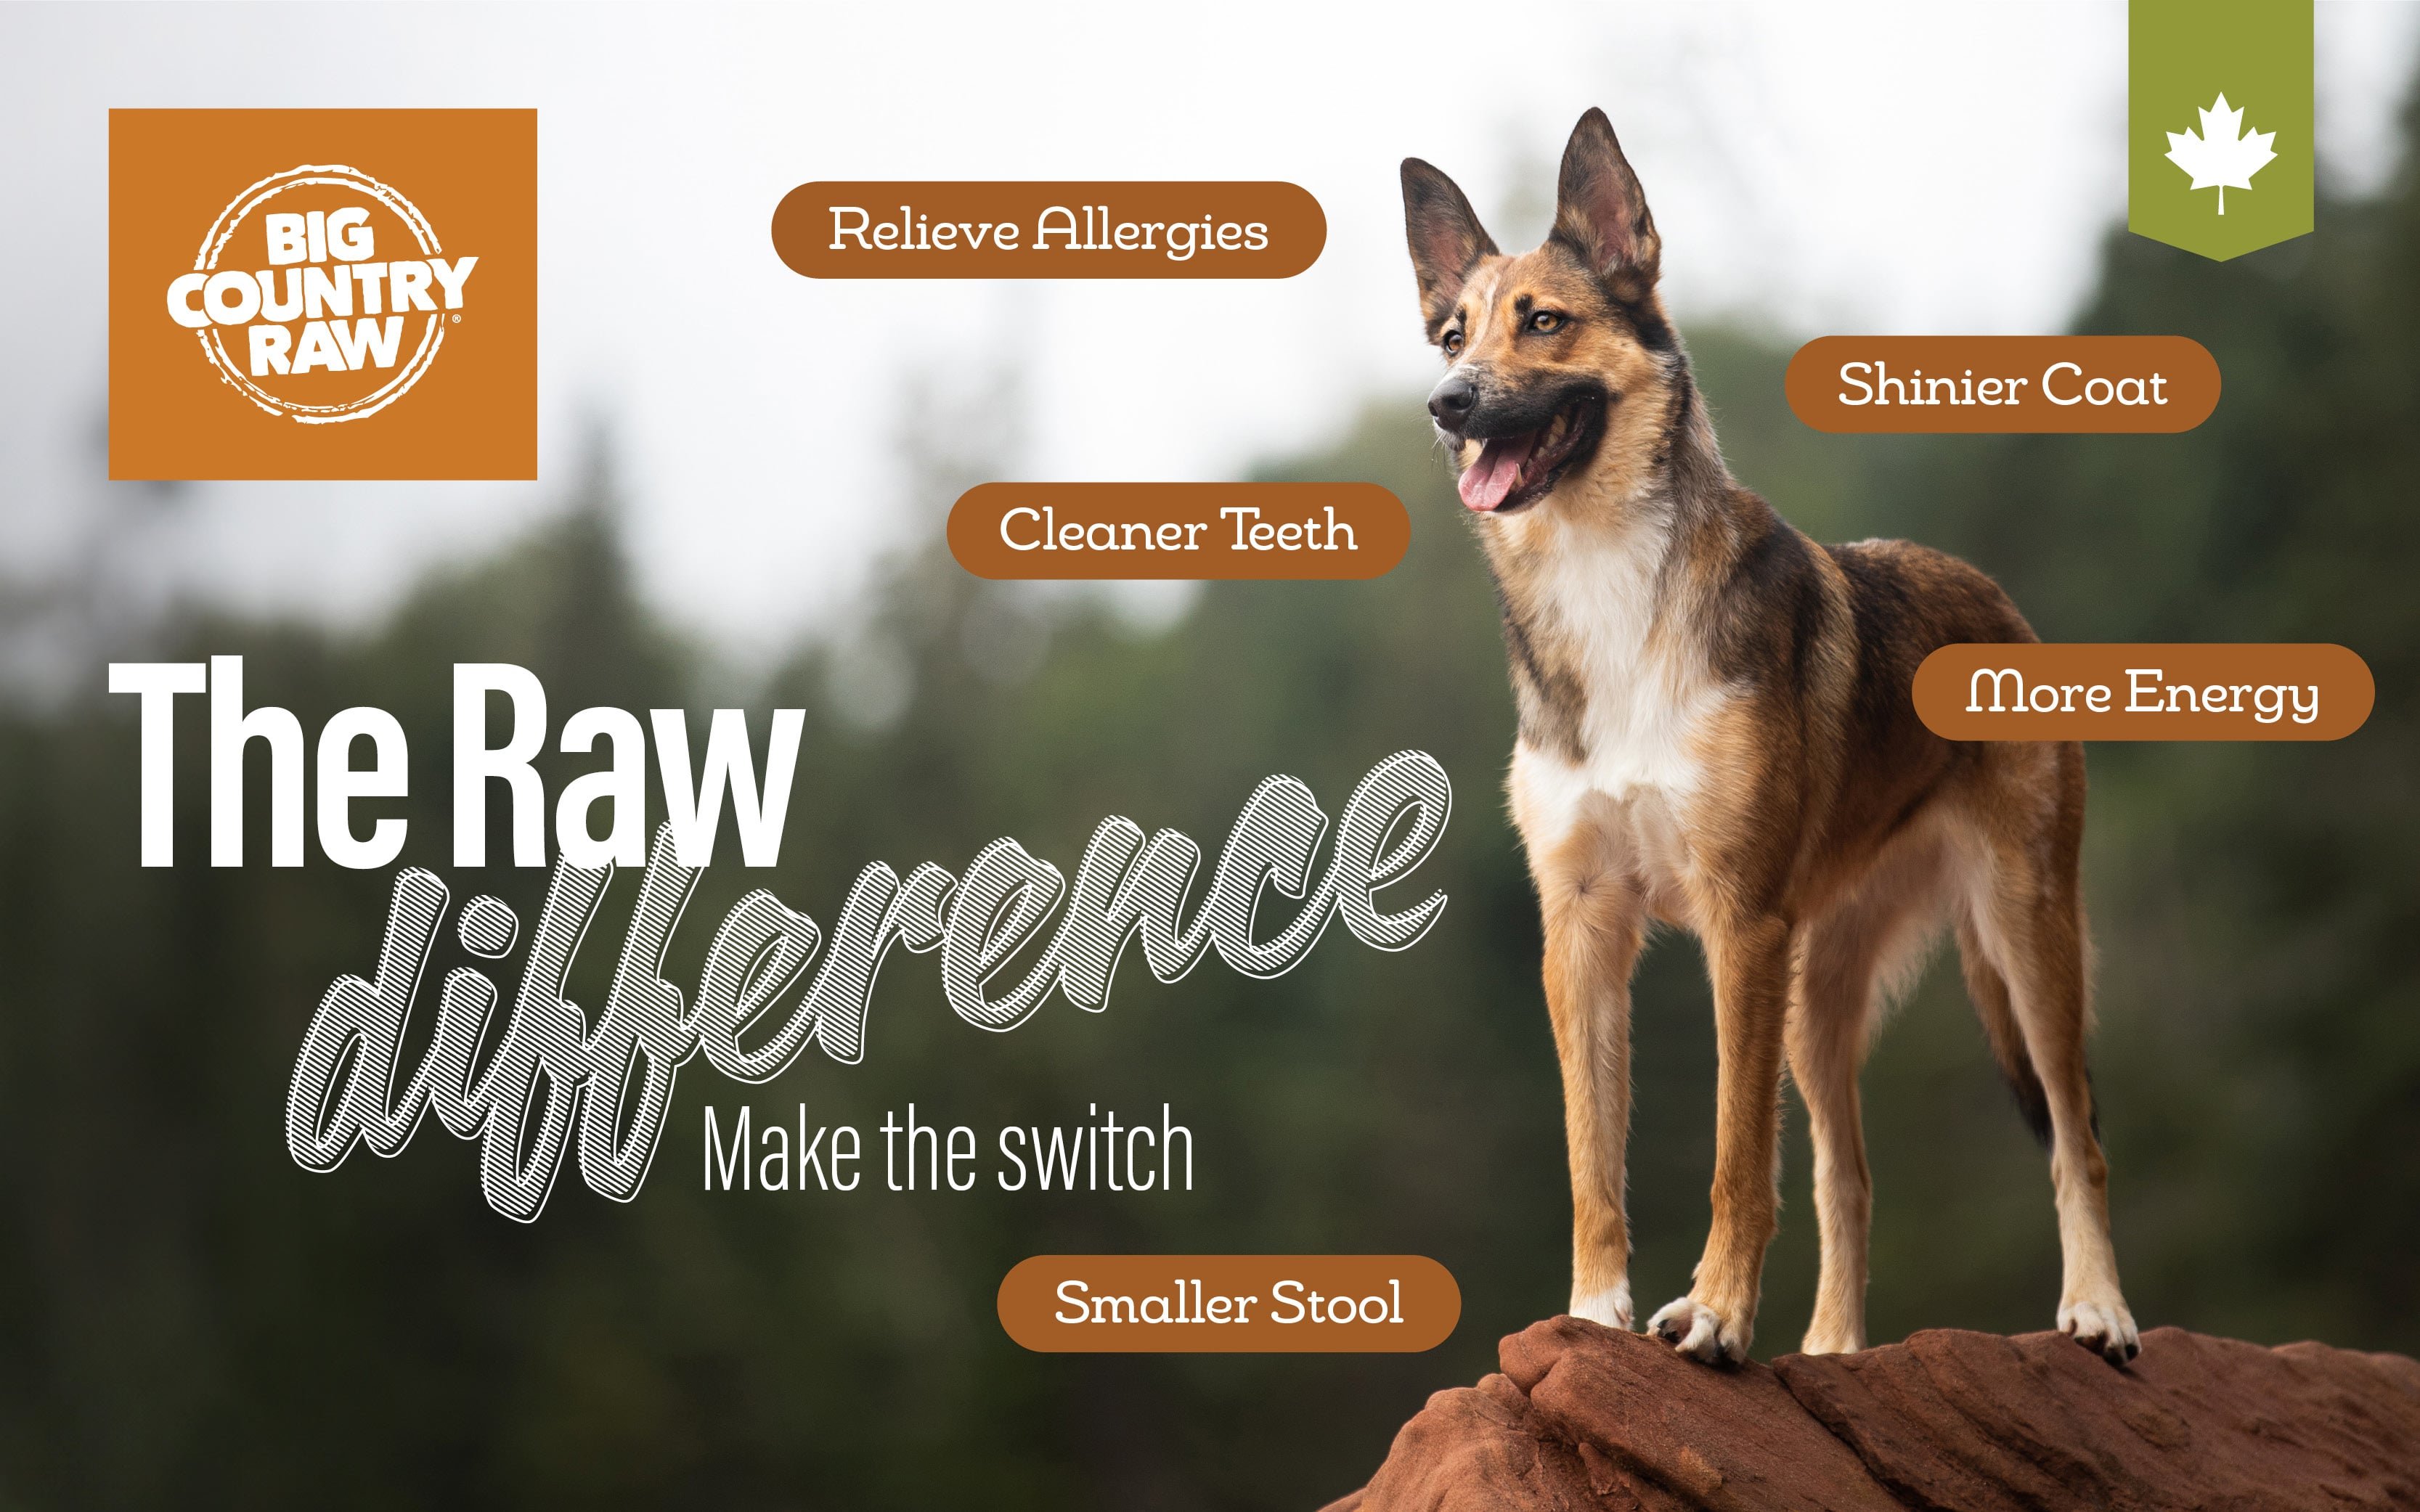 Big Country Raw - The Raw difference - make the switch - relieve allergies, cleaner teeth, more energy, shinier coat, smaller stool 